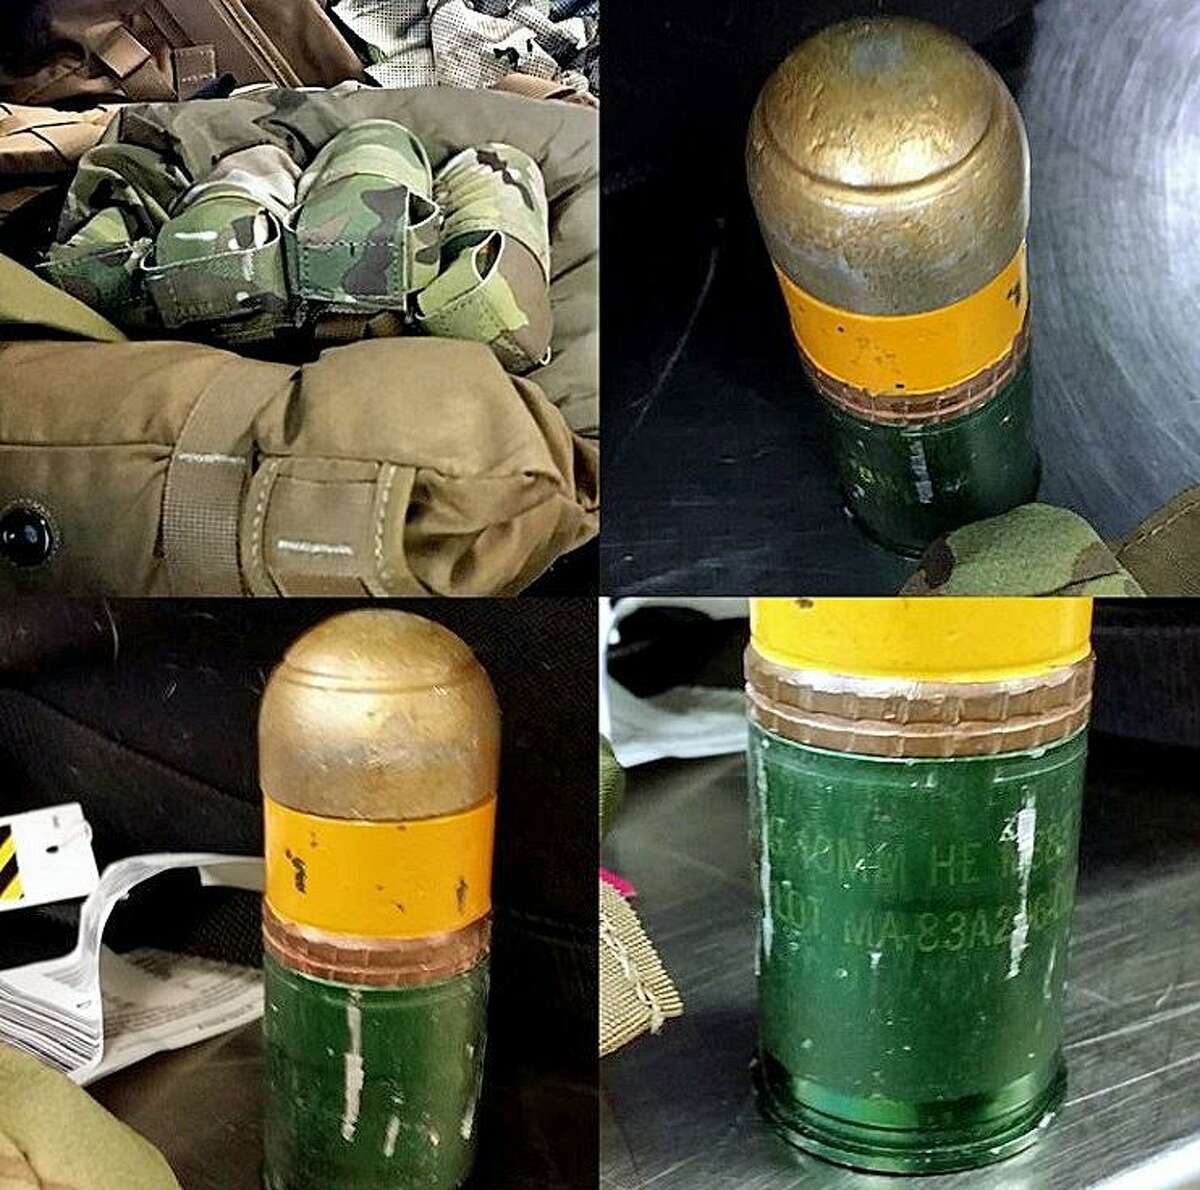 At the Birmingham, Alabama airport, Transportation Security Administration officers discovered four 40mm grenades in a tactical vest inside a checked bag. A TSA explosives specialist was called to scene and thankfully cleared the items as inert. In this case, only the baggage screening area was evacuated resulting in a 10-minute halt on baggage screening locations.